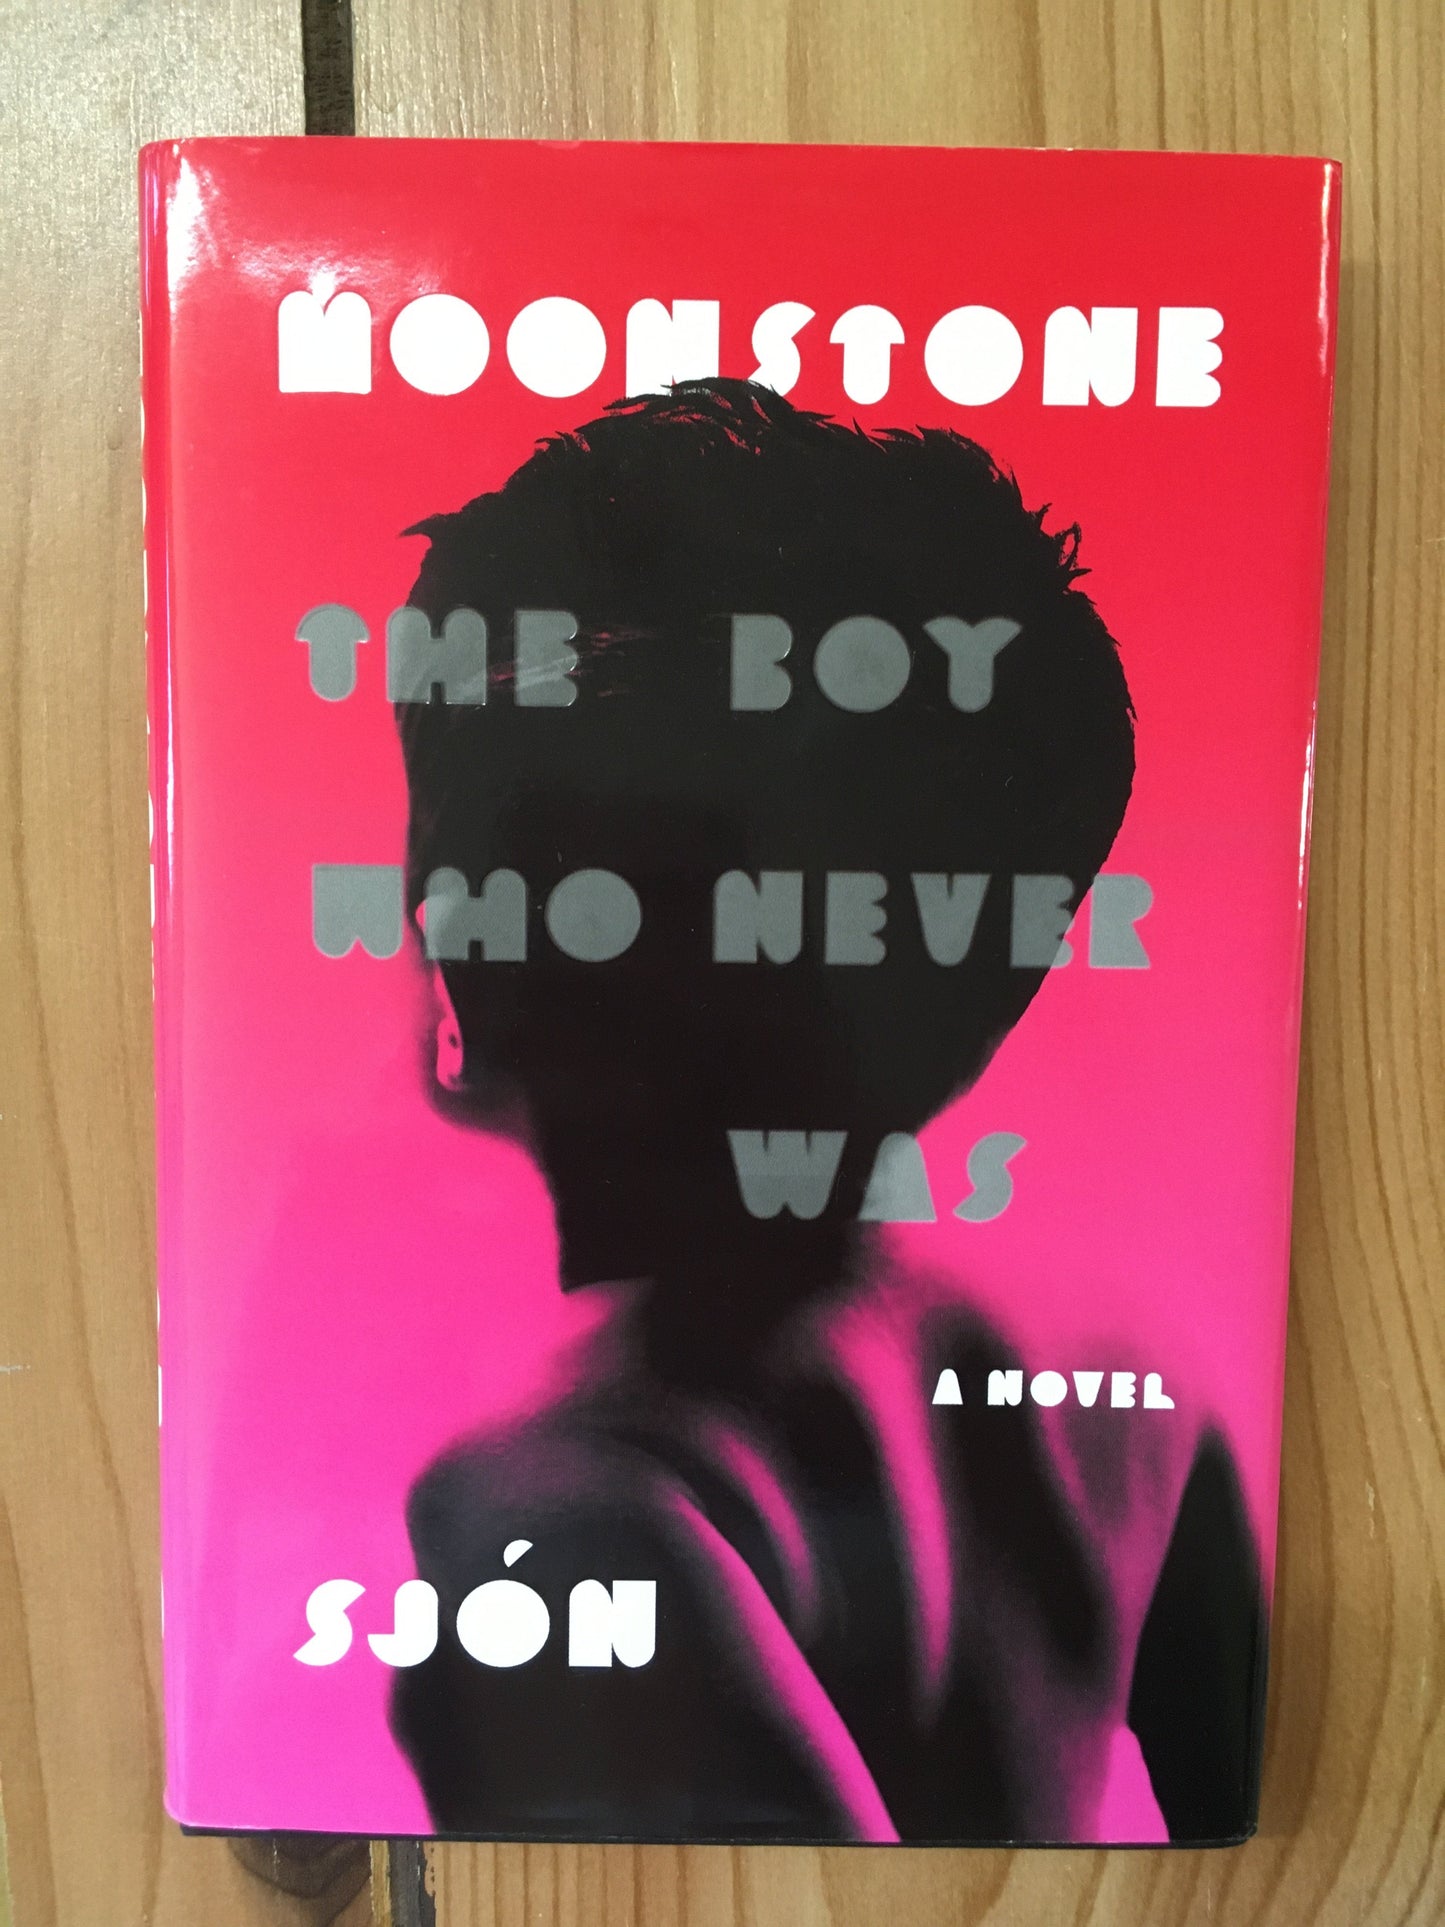 Moonstone: The Boy Who Never Was